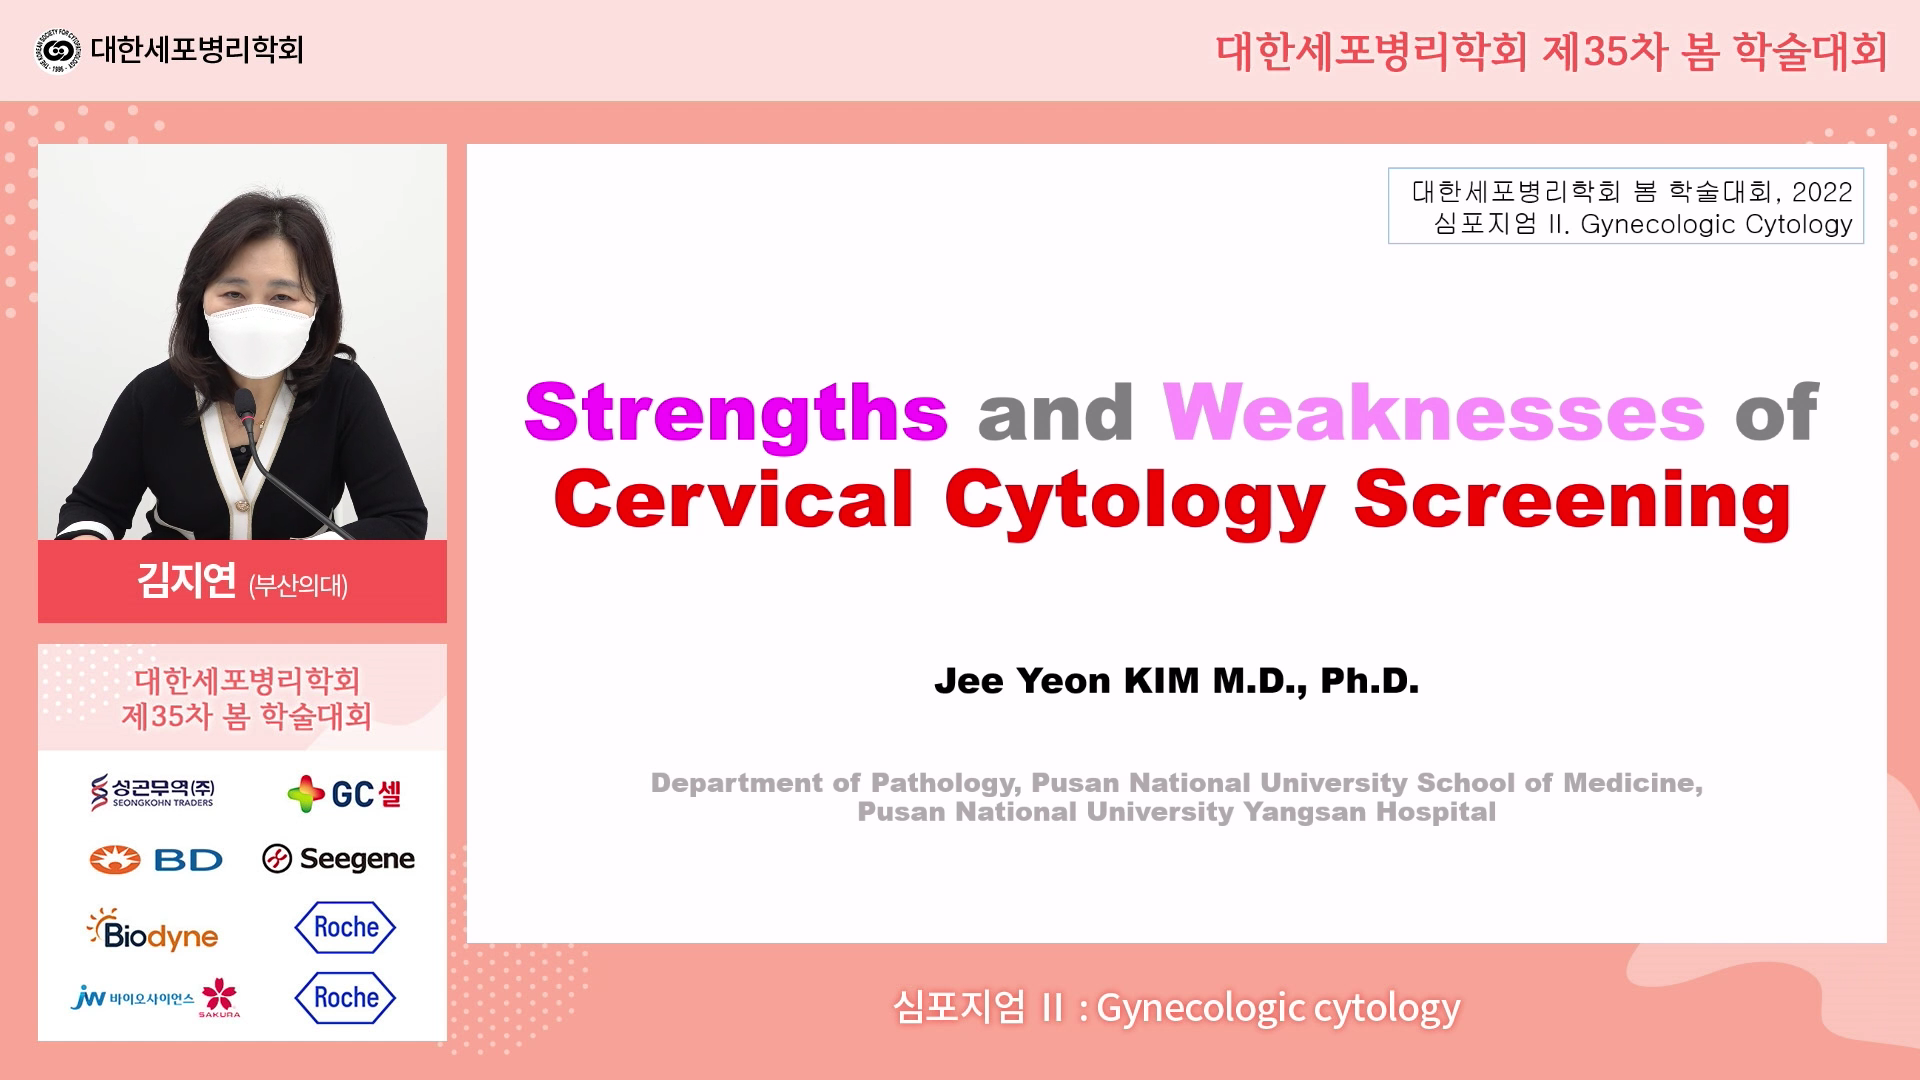 Strengths and weaknesses of cervical cytology screening